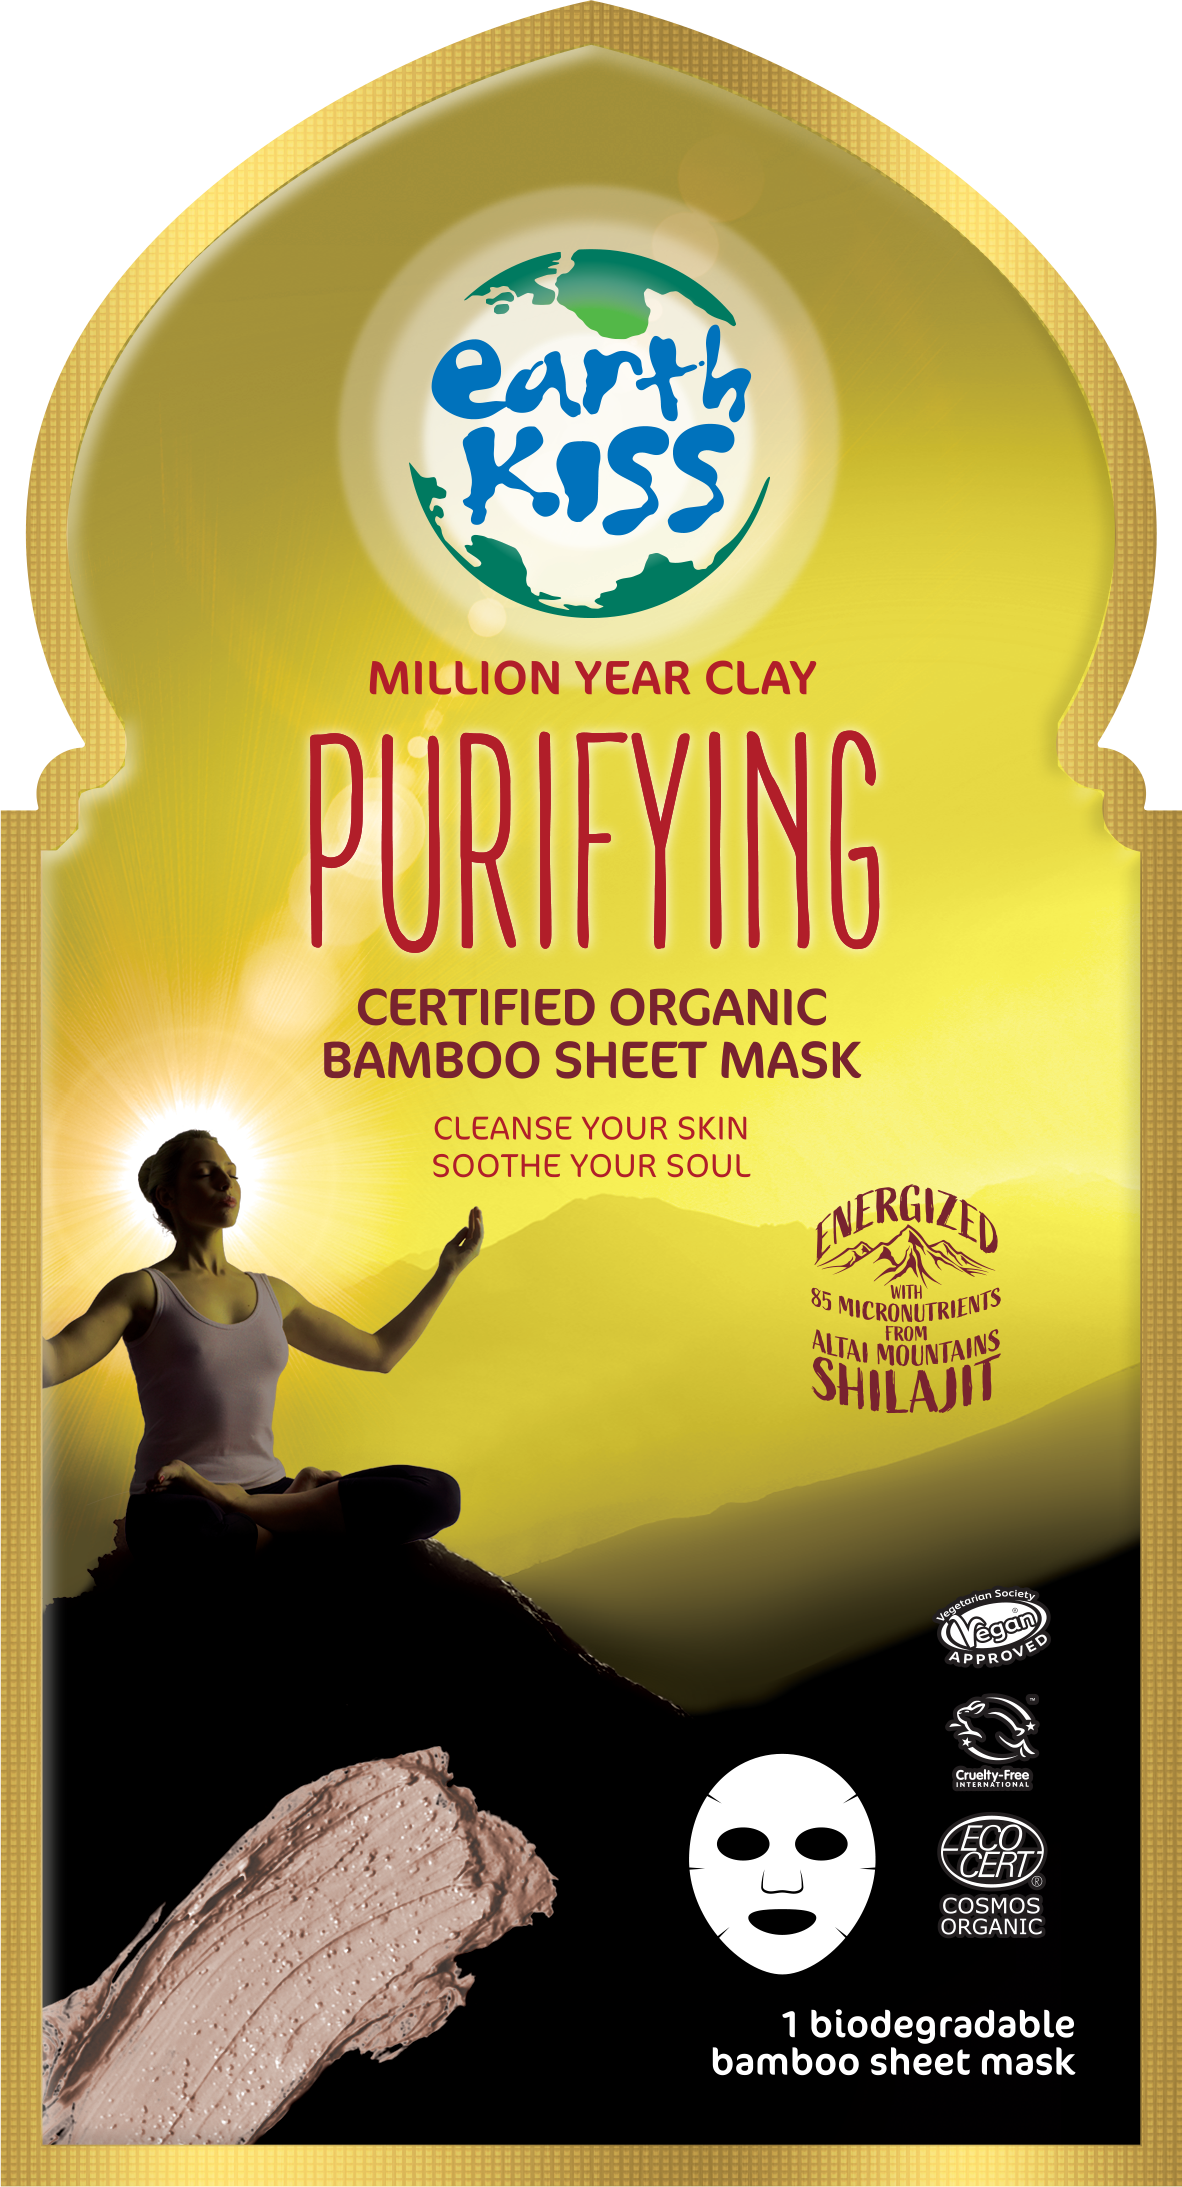 Earth Kiss Inspirations Purifying Organic Bamboo Sheet Mask with Shilajit and Million Year Clay to Cleanse Your Skin